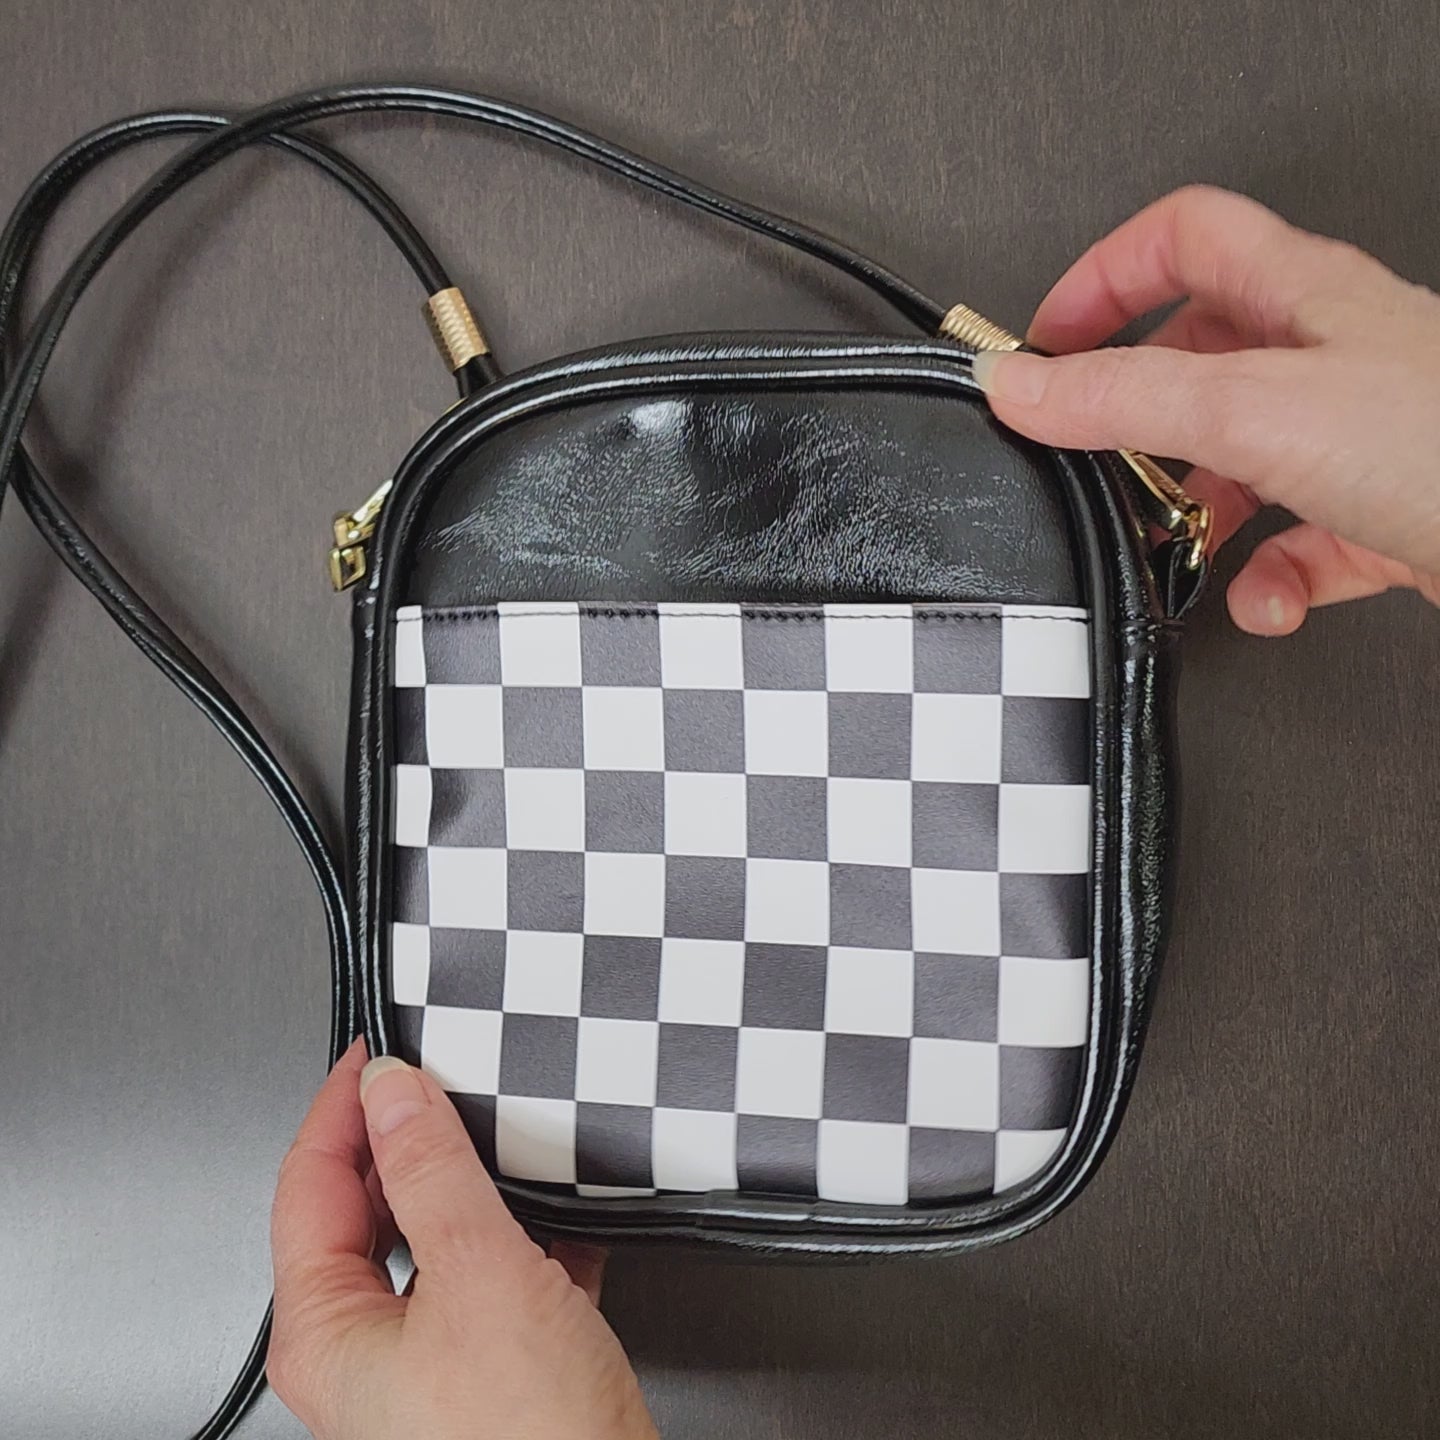 Vans checkered tote bag in black and white | ASOS